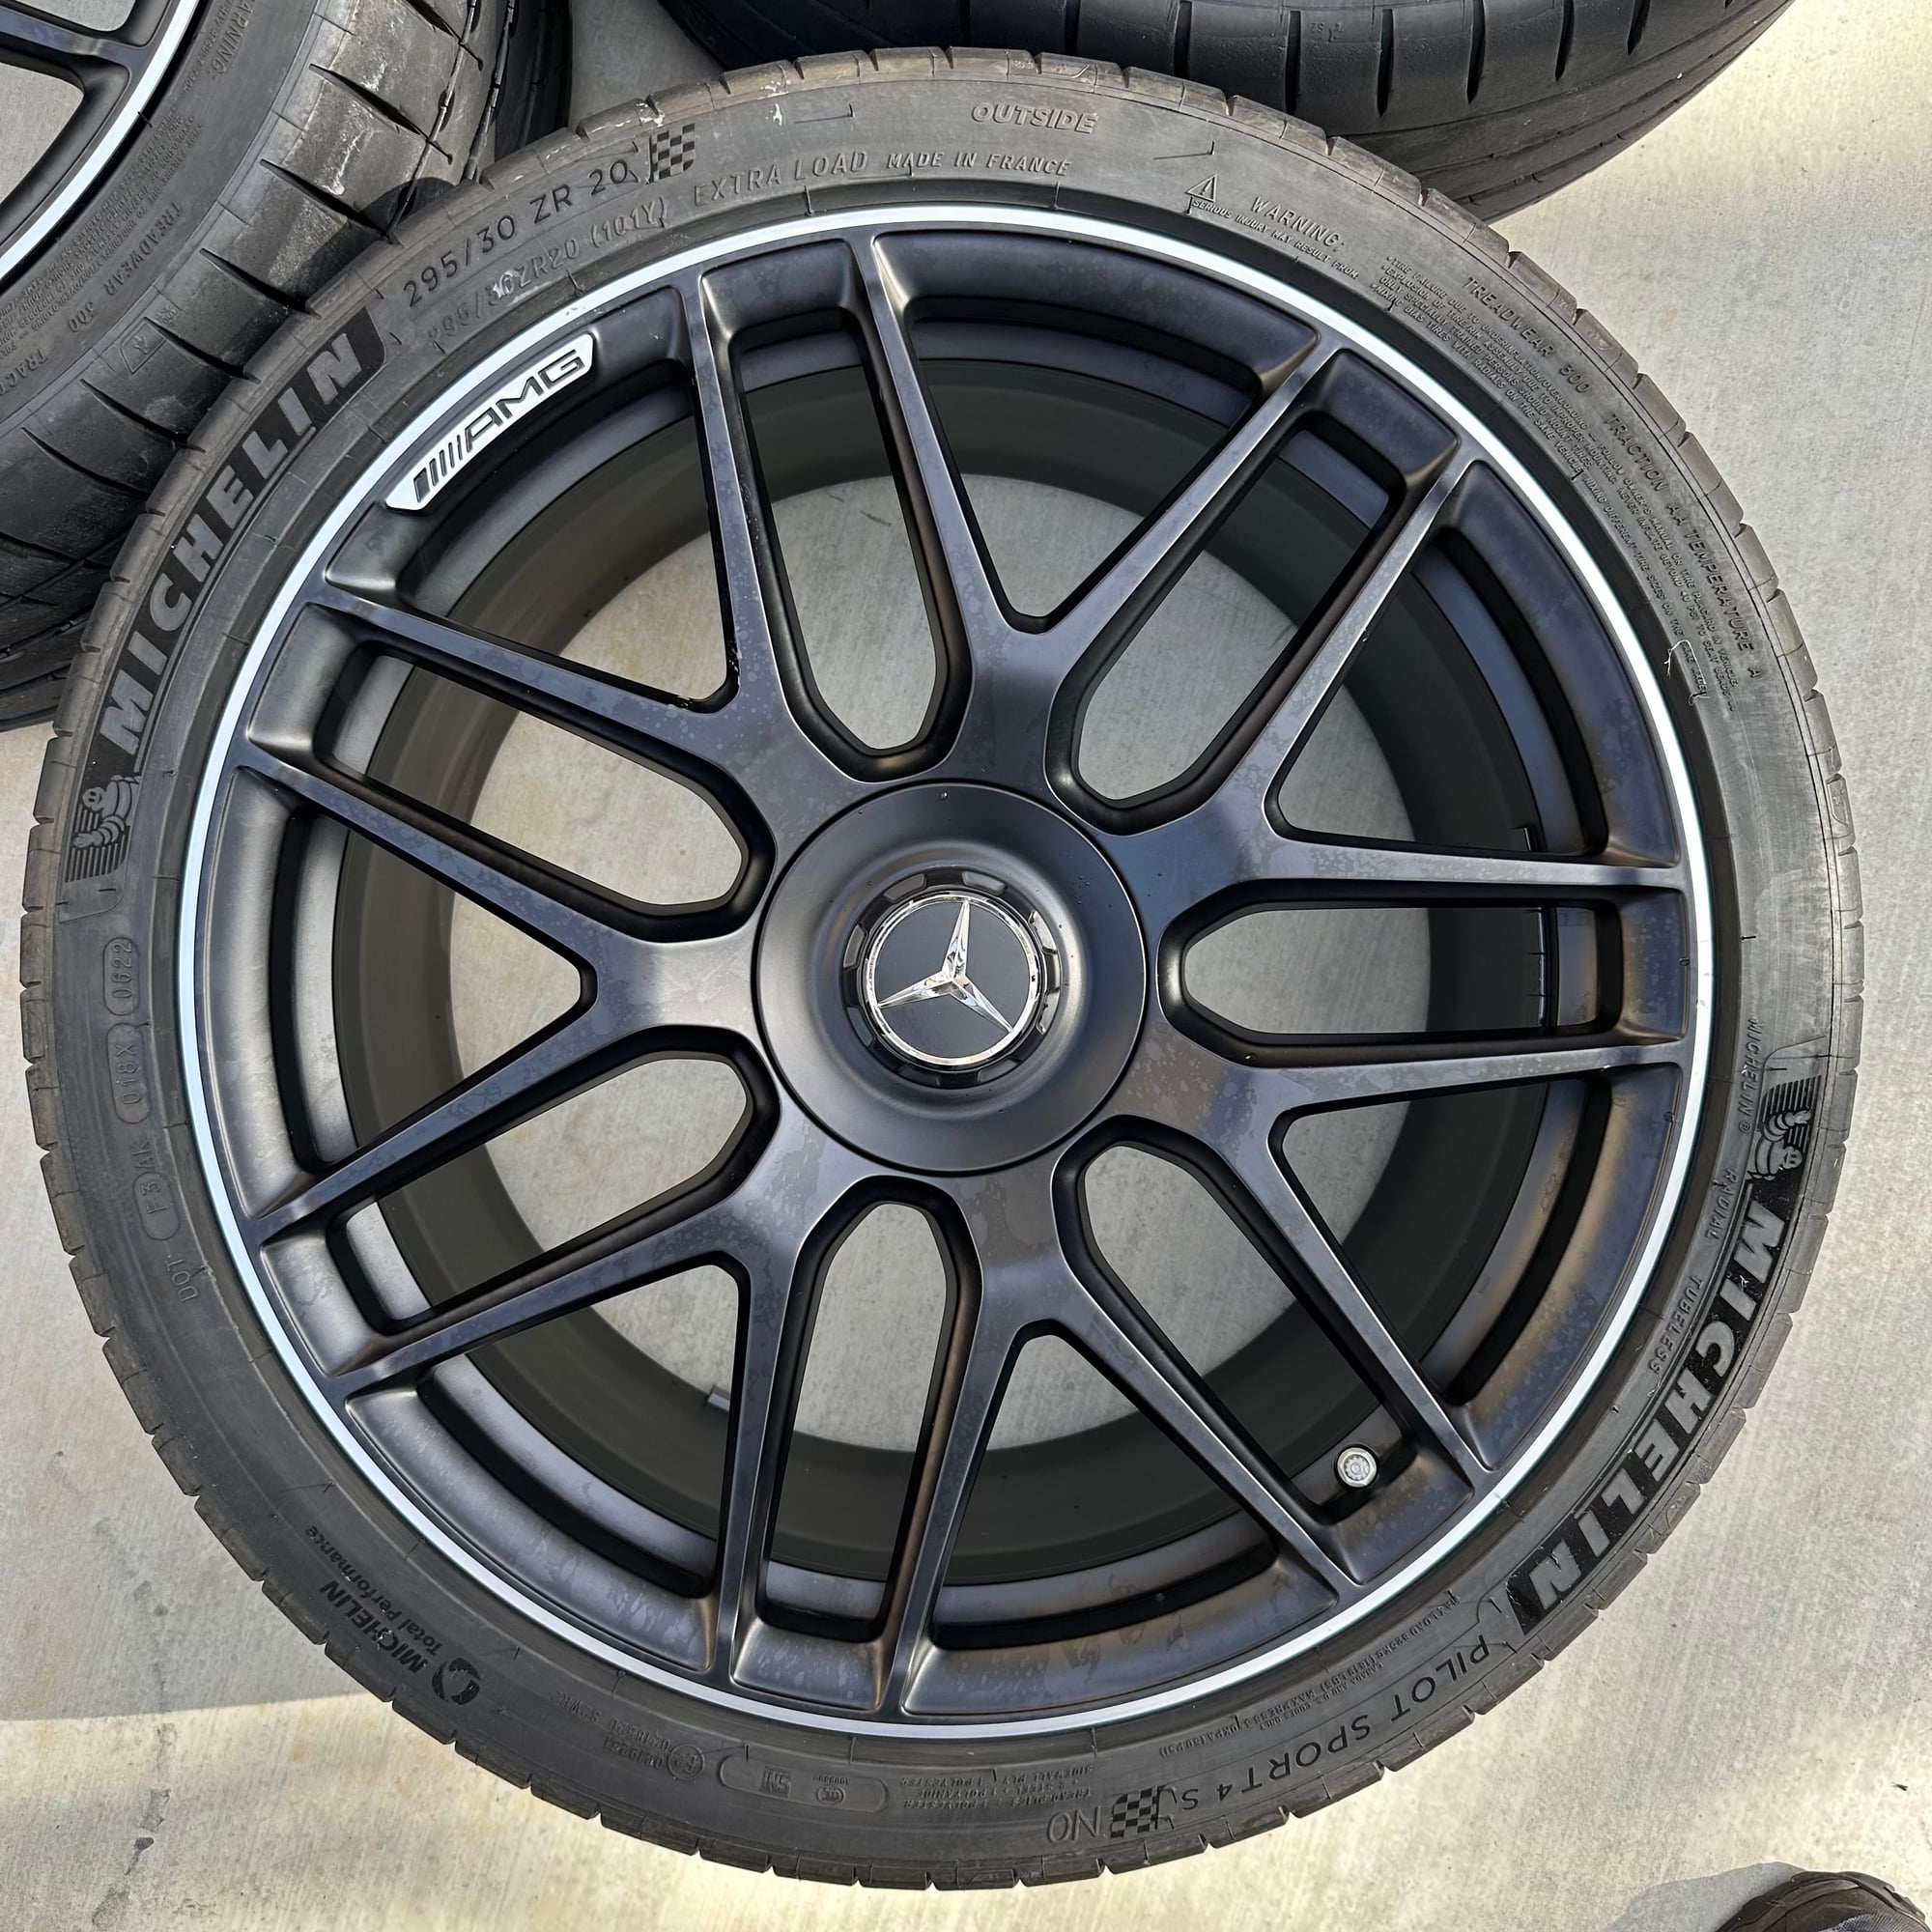 Wheels and Tires/Axles - 20" AMG forged cross-spoke wheels off W213 E63 - Used - 2018 to 2023 Mercedes-Benz E63 AMG - Mountain View, CA 94041, United States